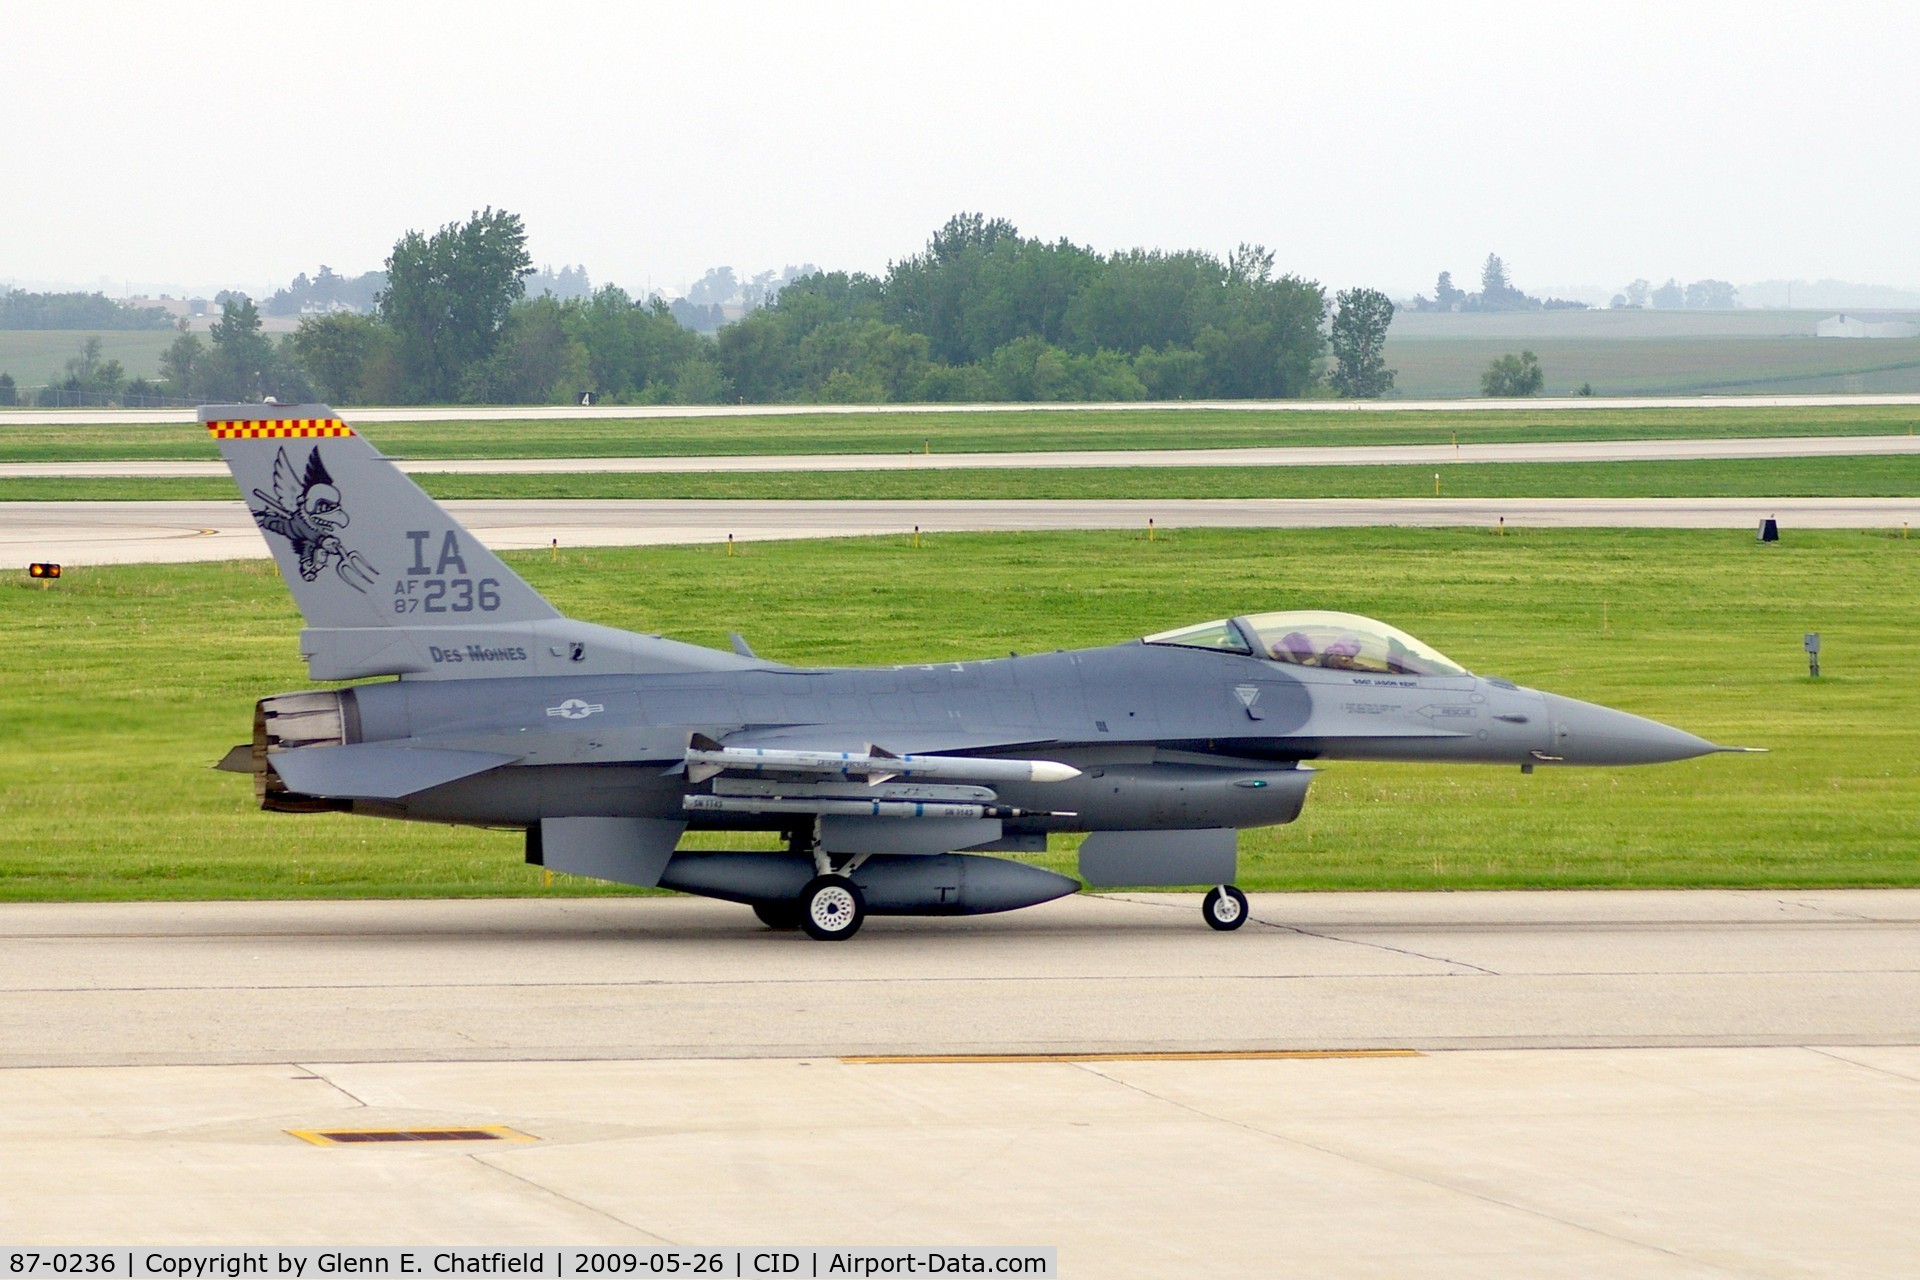 87-0236, 1987 General Dynamics F-16C Fighting Falcon C/N 5C-497, Cyclone 22 taxiing on Delta to Landmark FBO.  Diverted from DSM due to weather there.